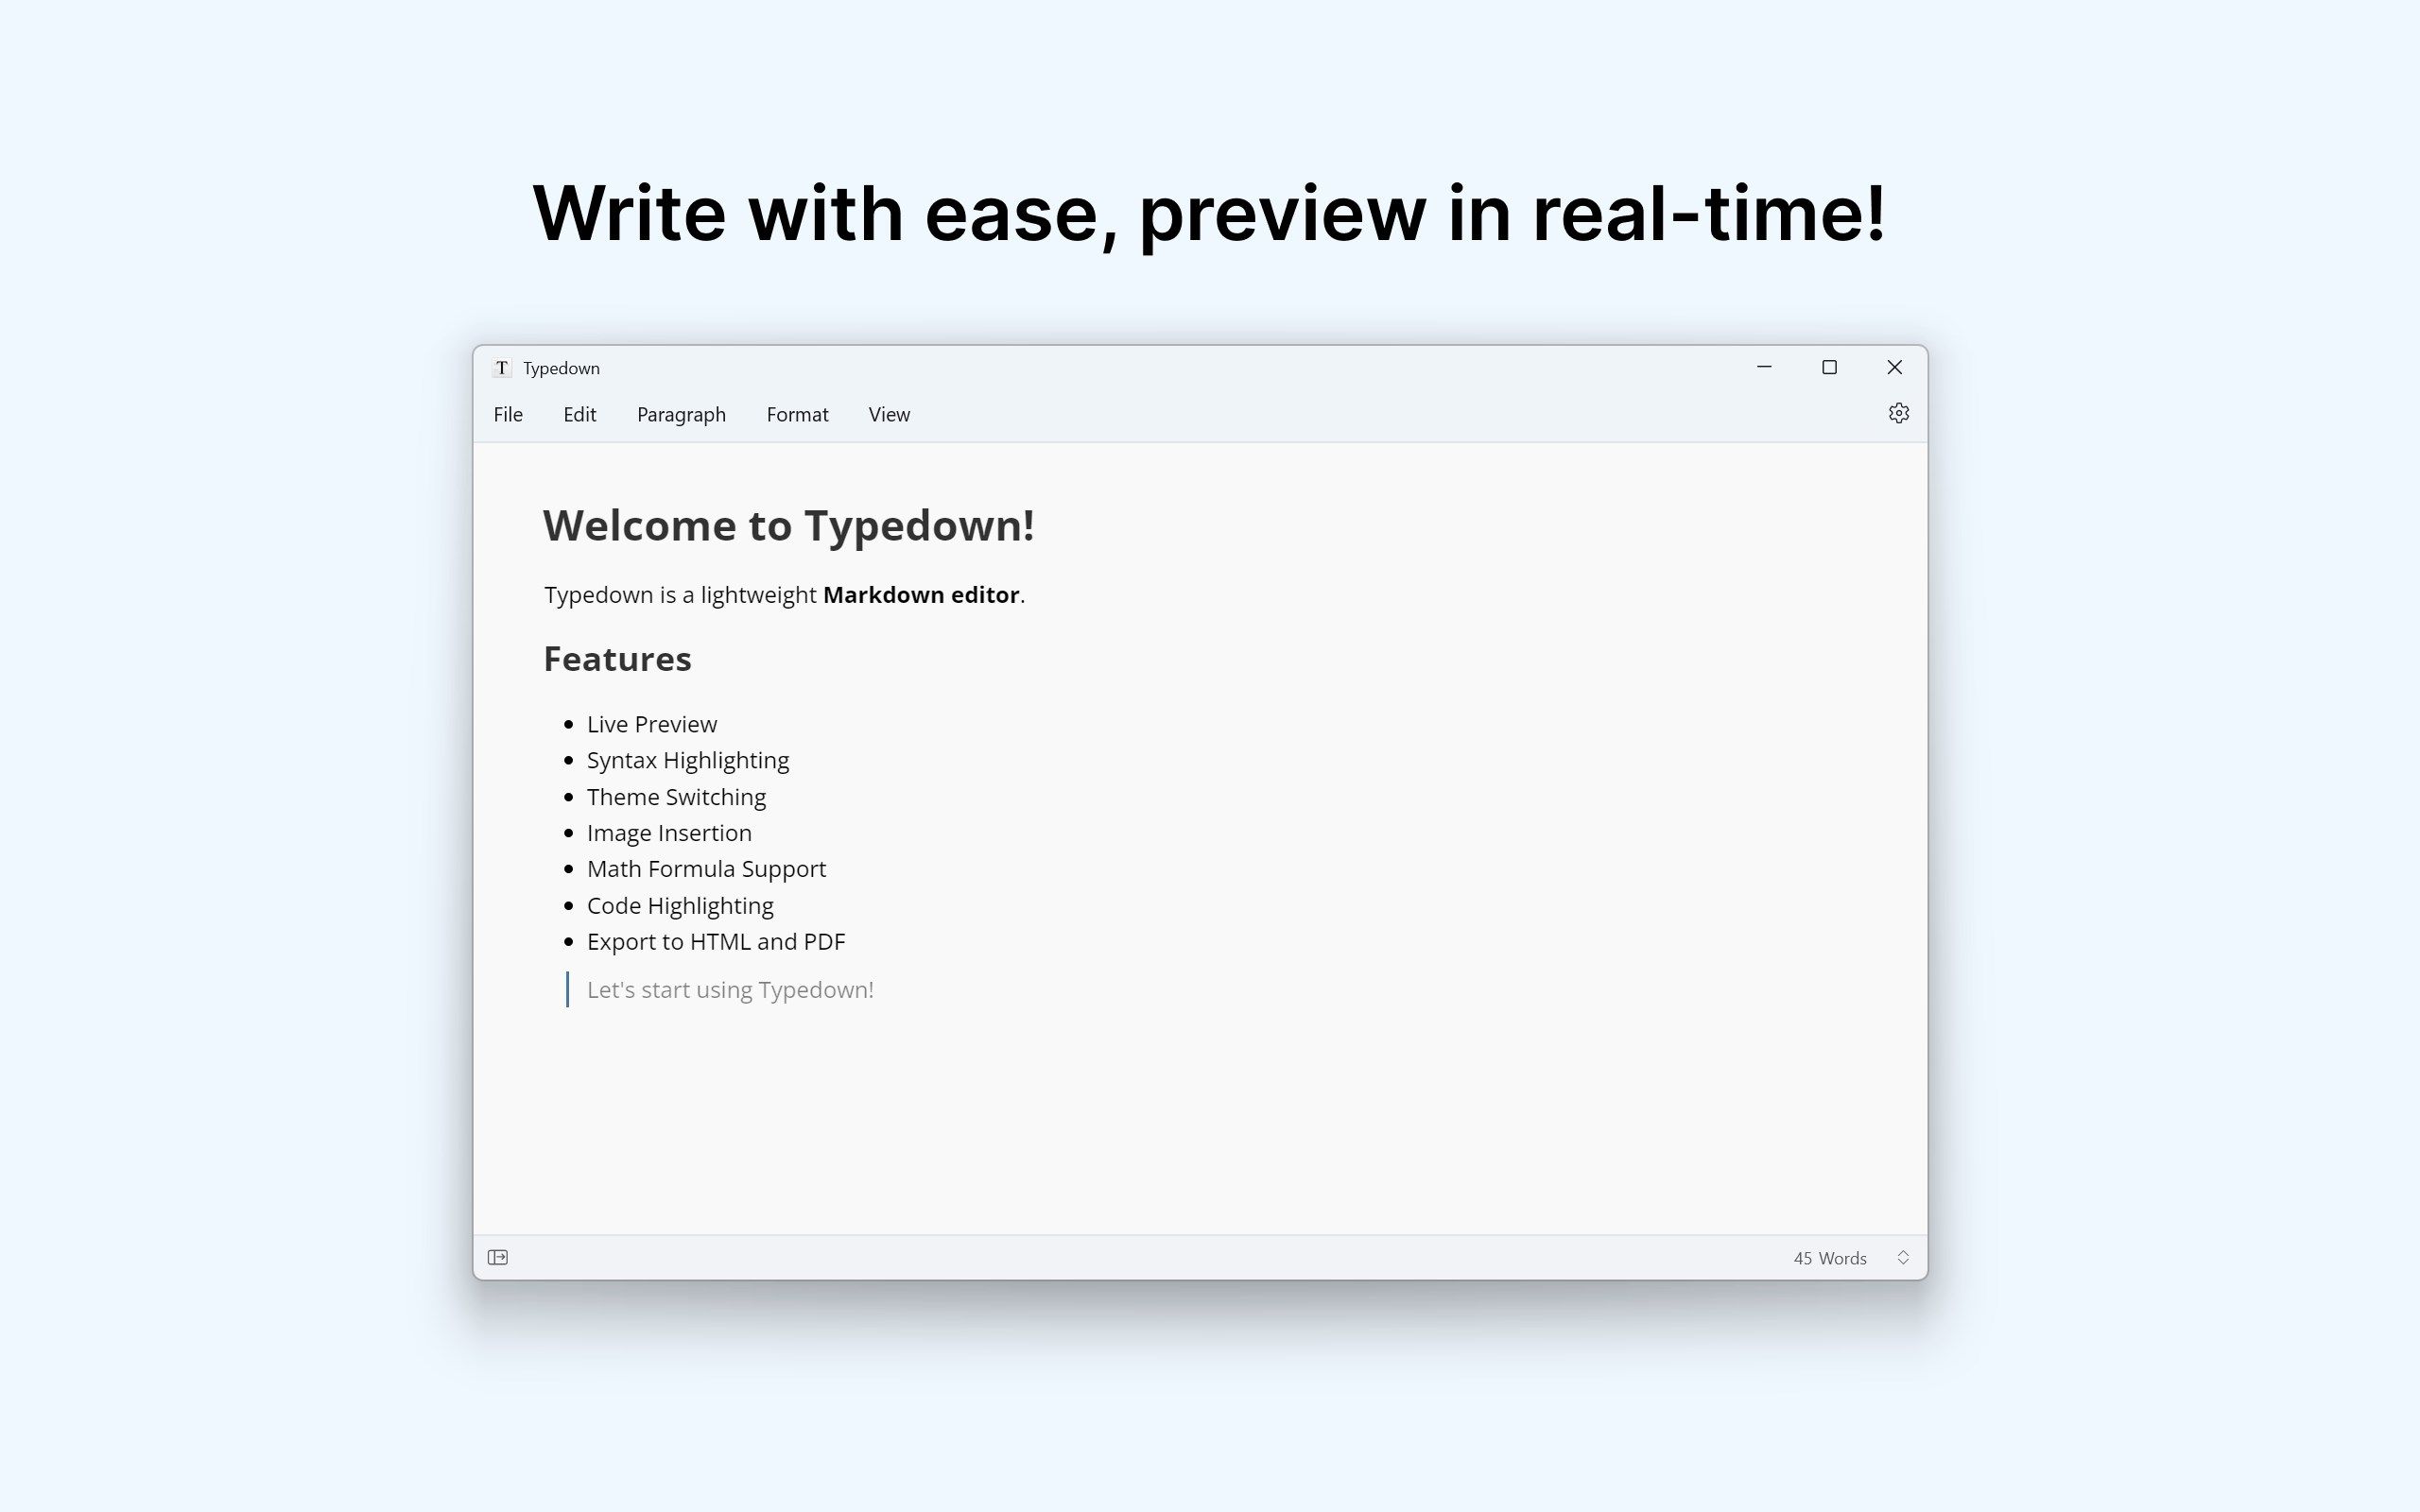 Write with ease, preview in real-time!